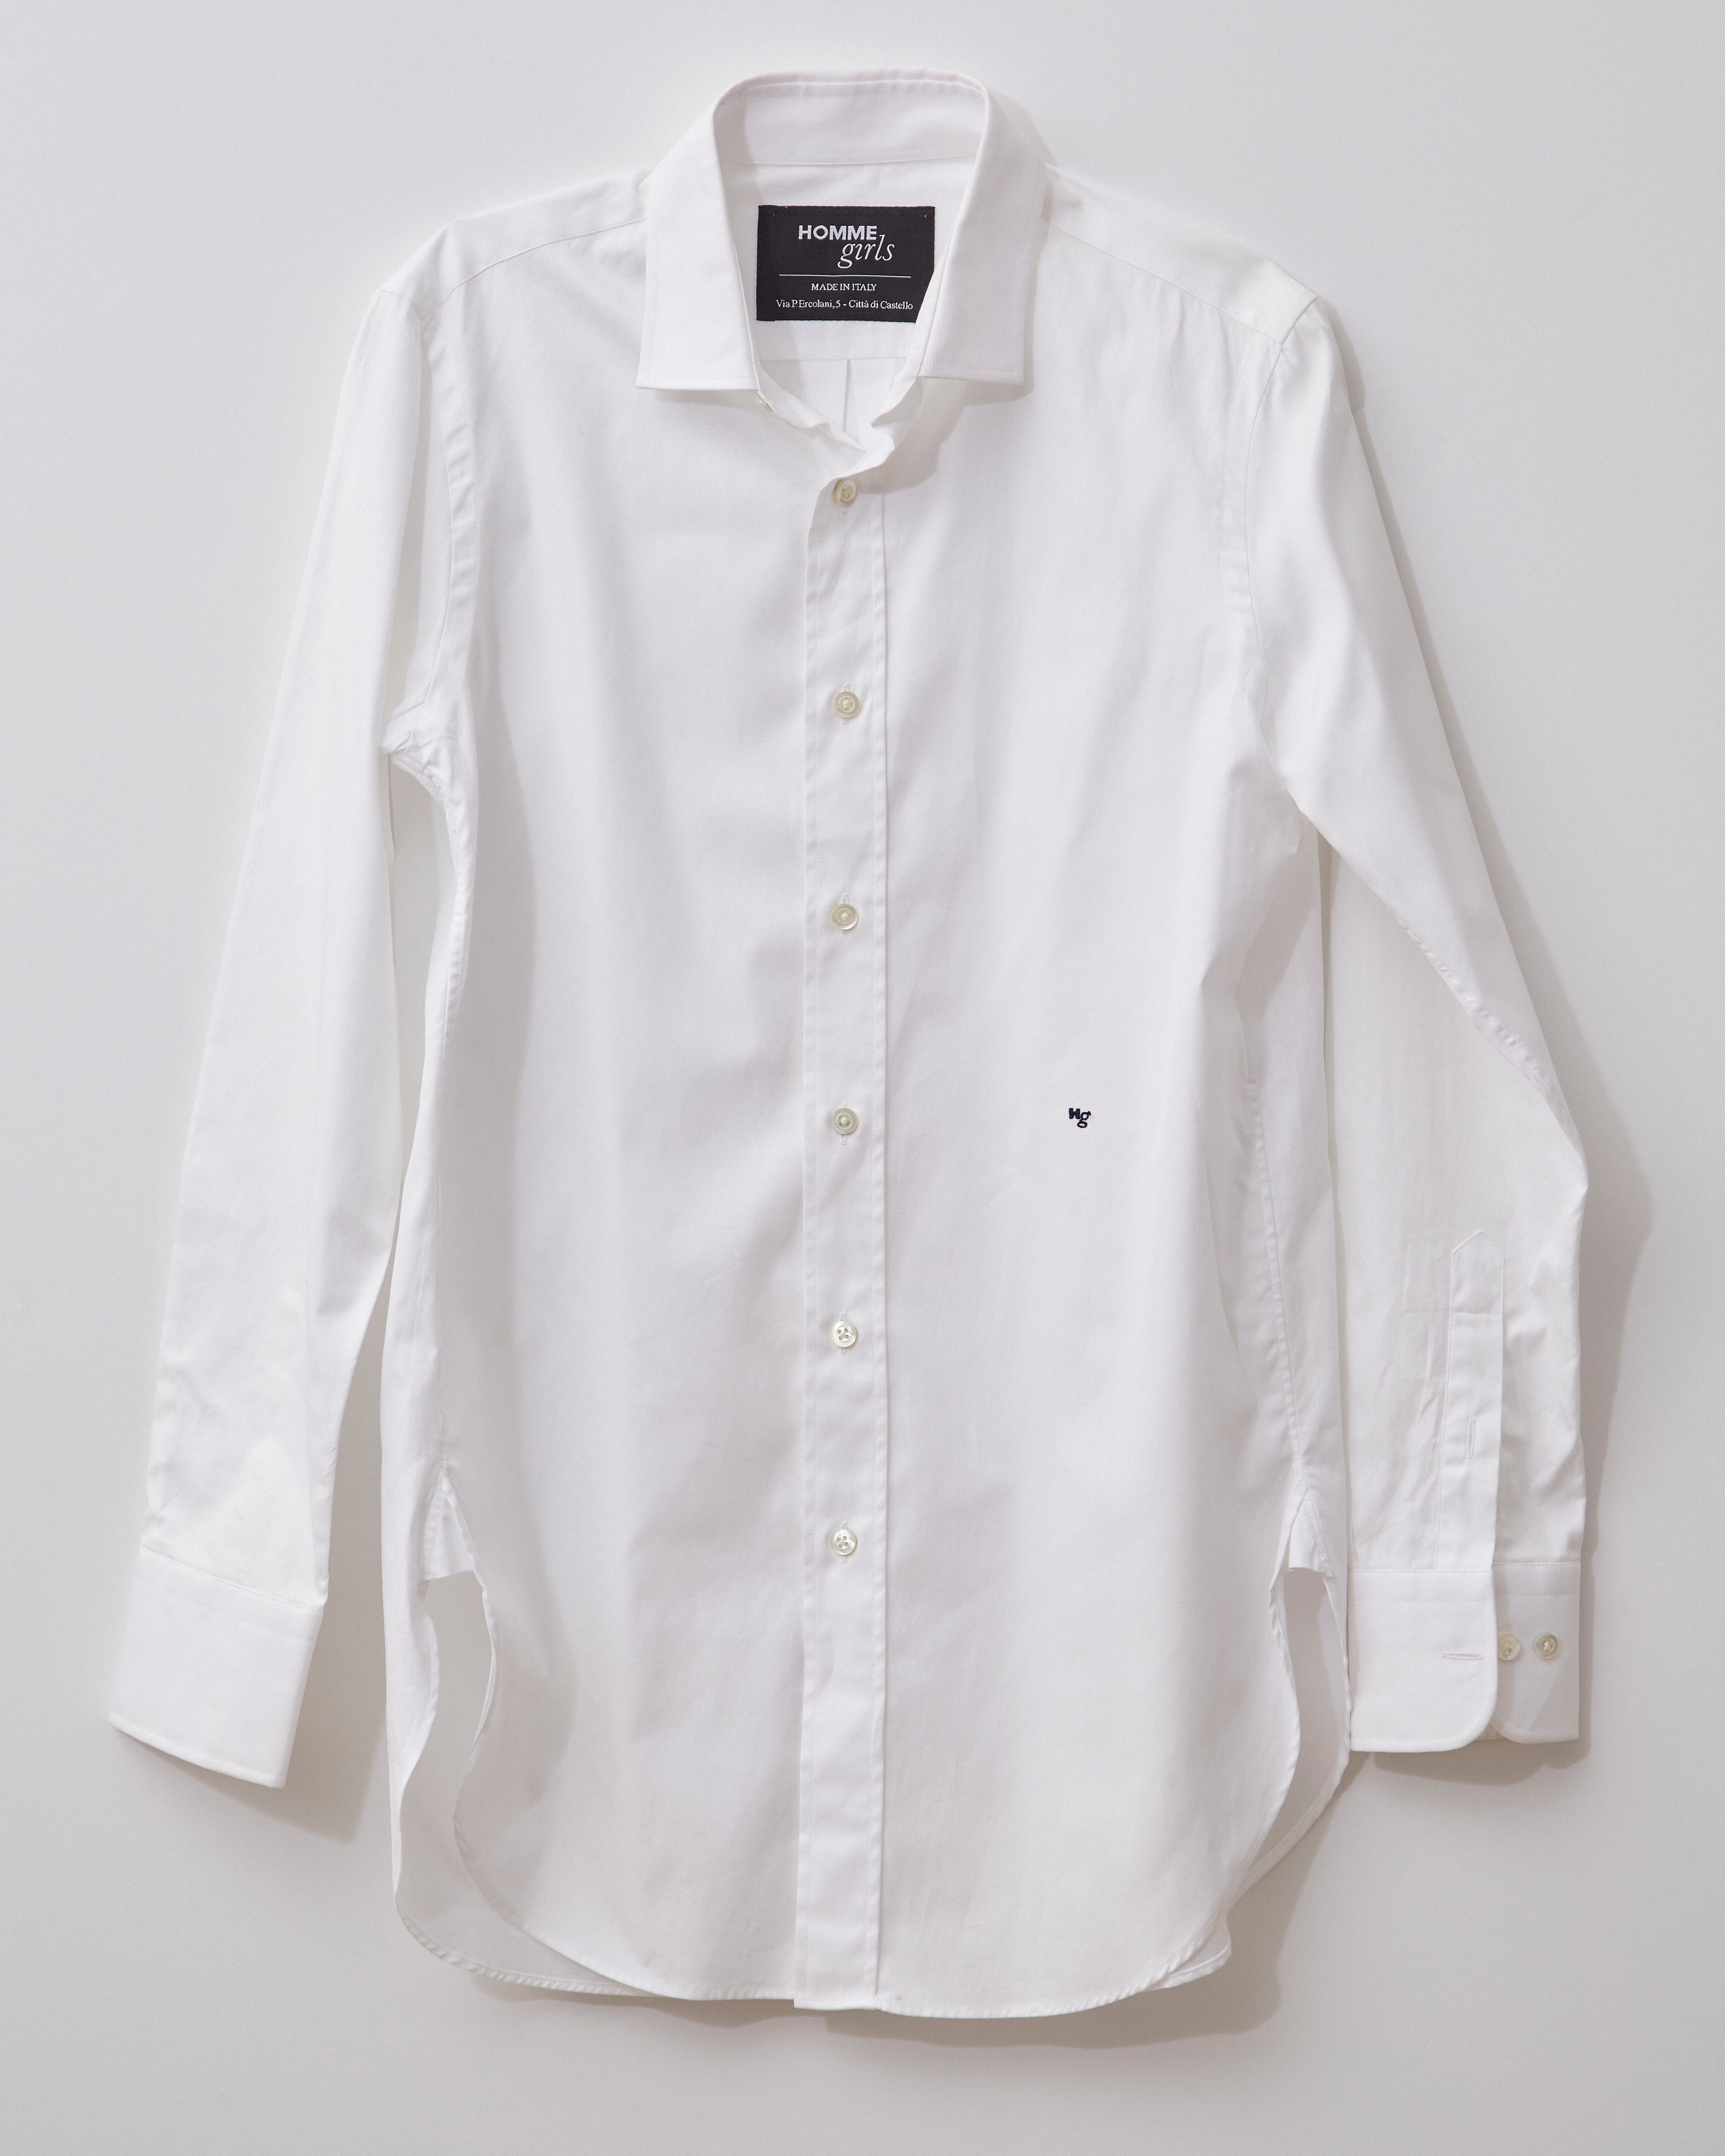 How to Style a White Button Up Shirt Year Round